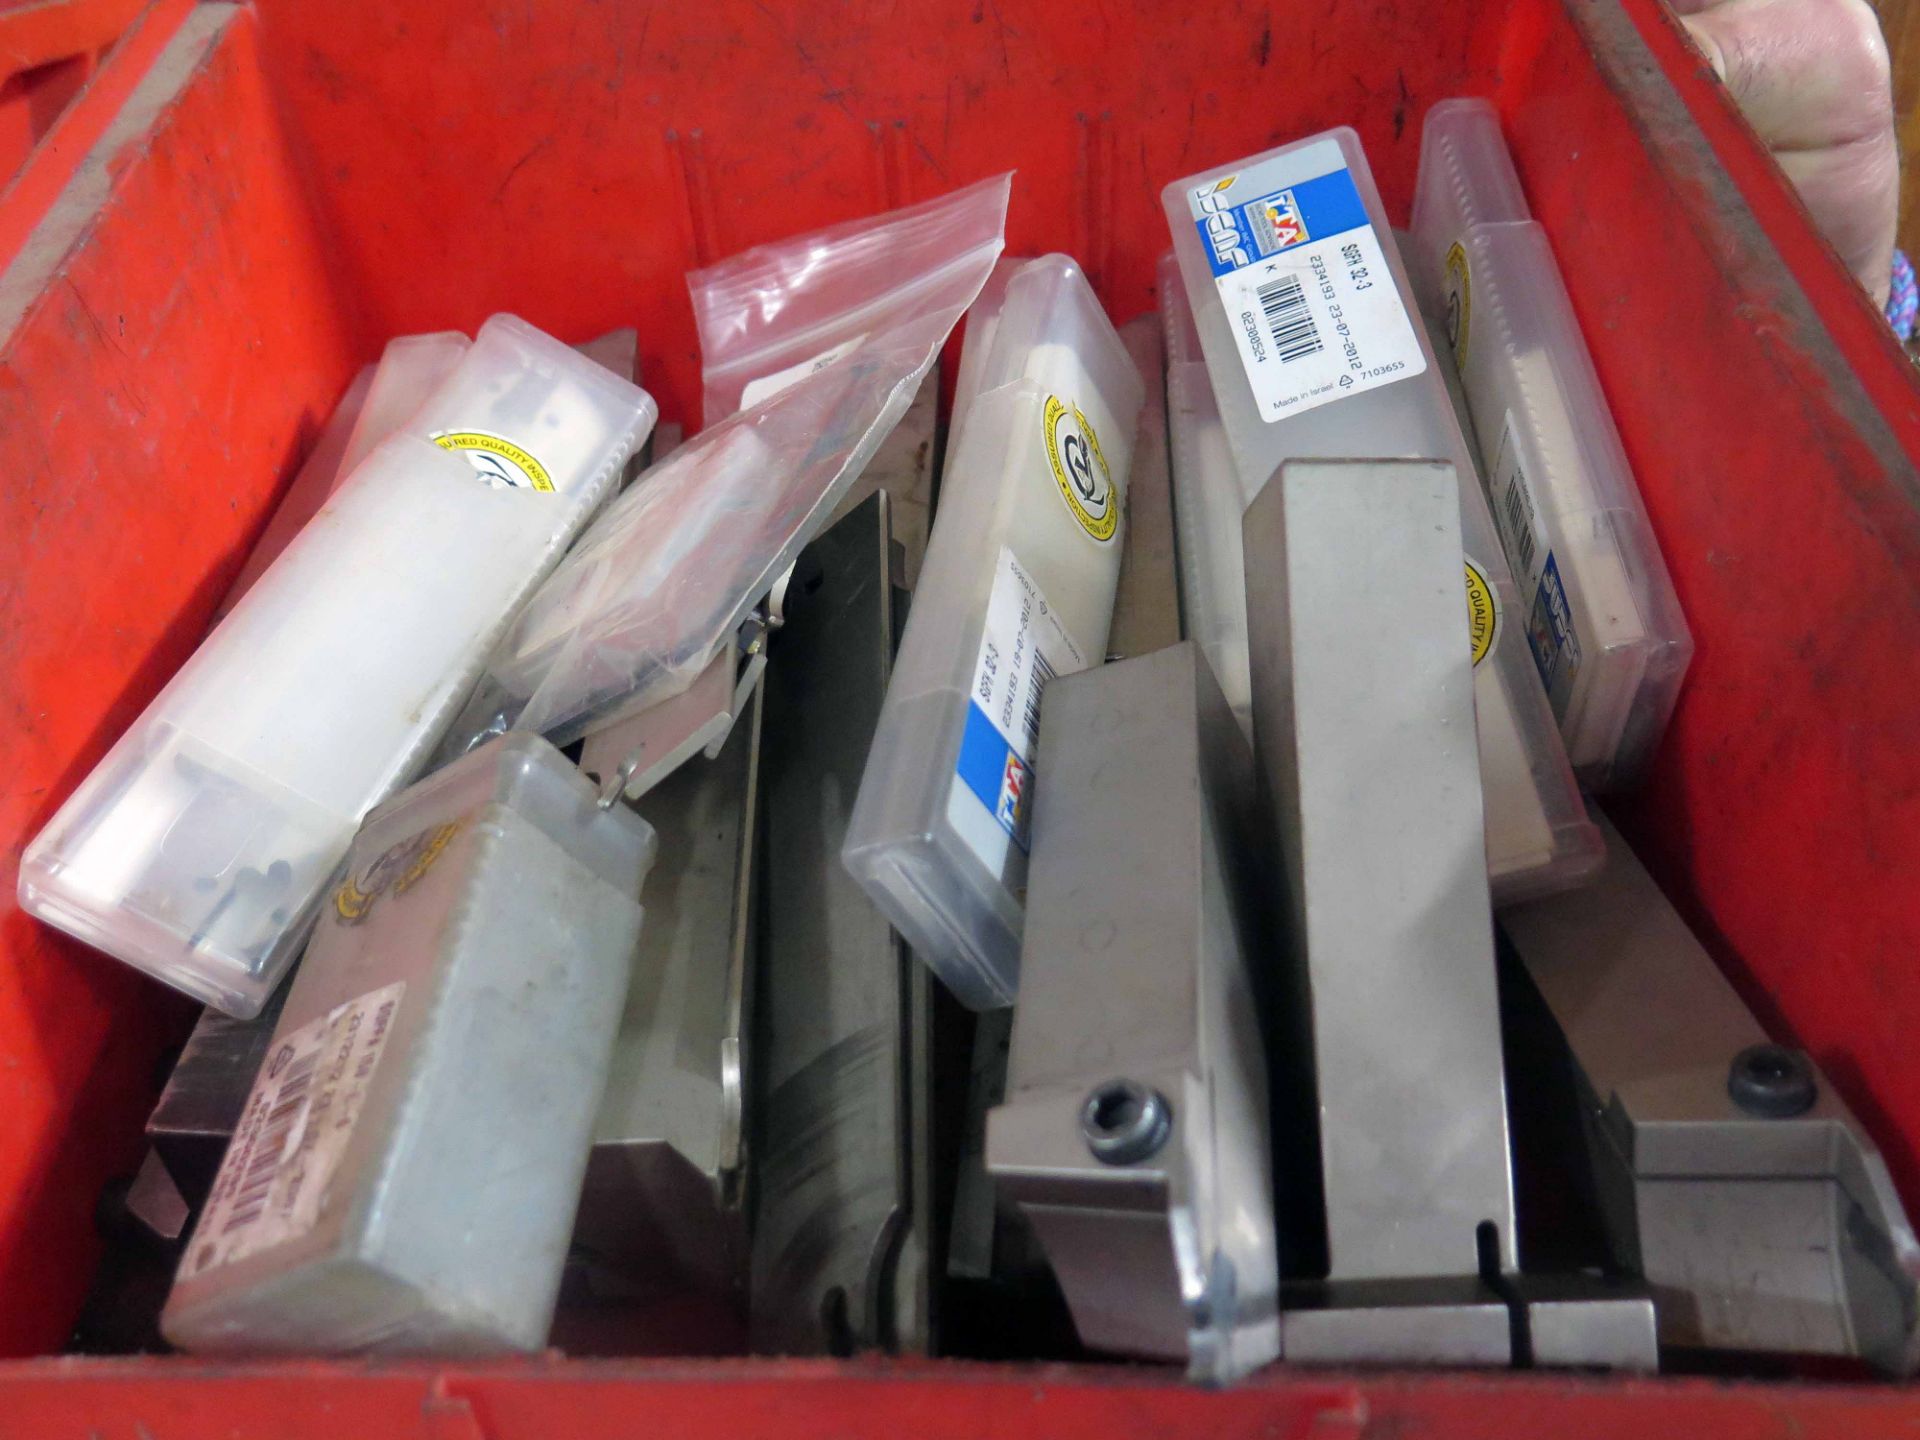 LOT CONSISTING OF: tooling pieces, cutoff blades, etc., assorted